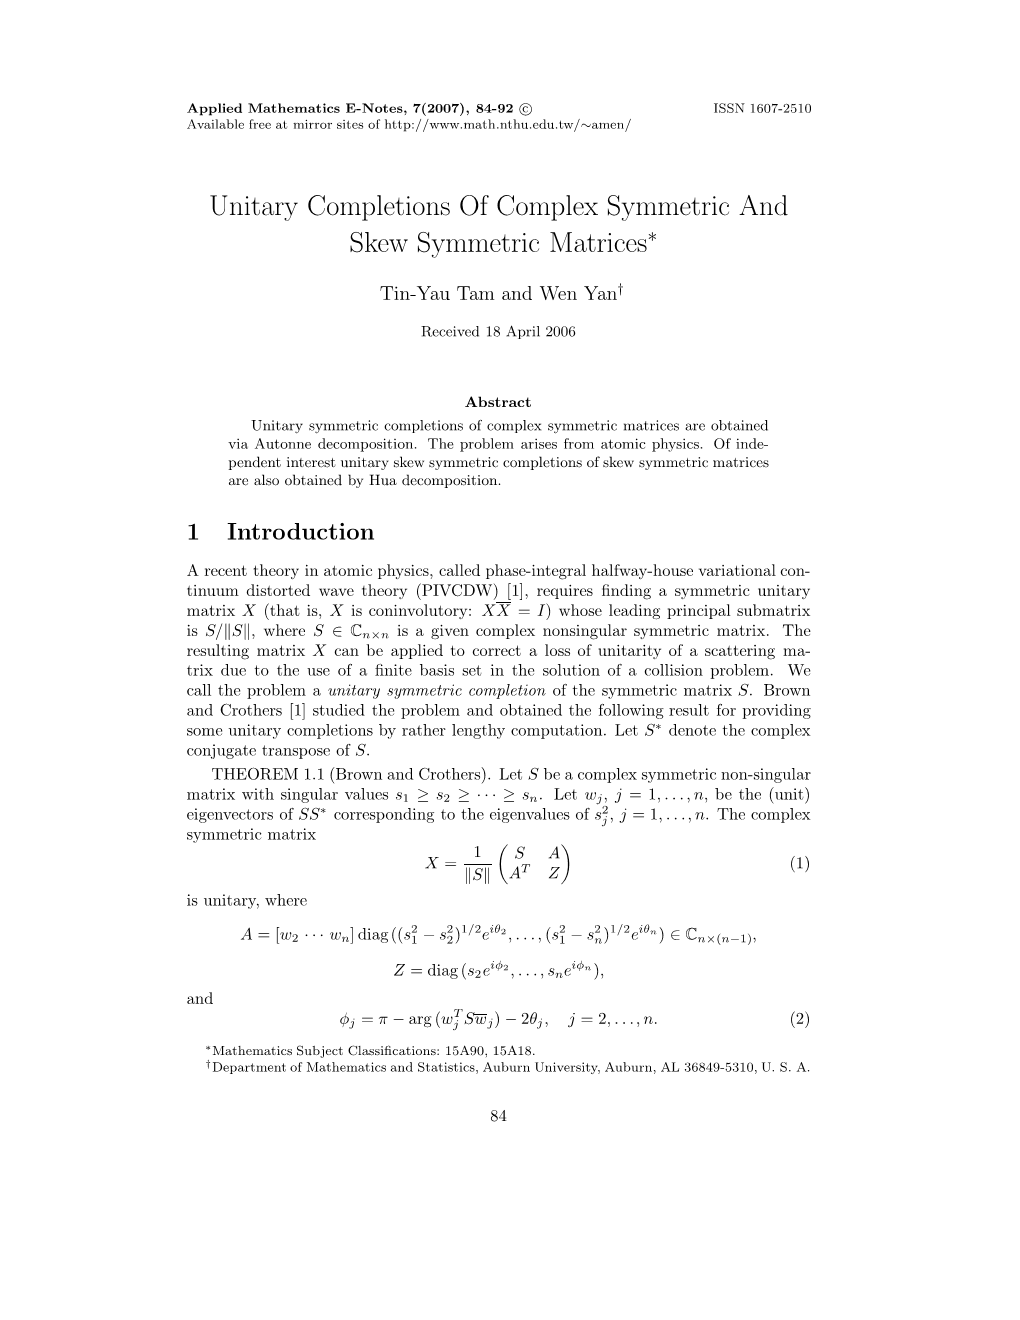 Unitary Completions of Complex Symmetric and Skew Symmetric Matrices∗